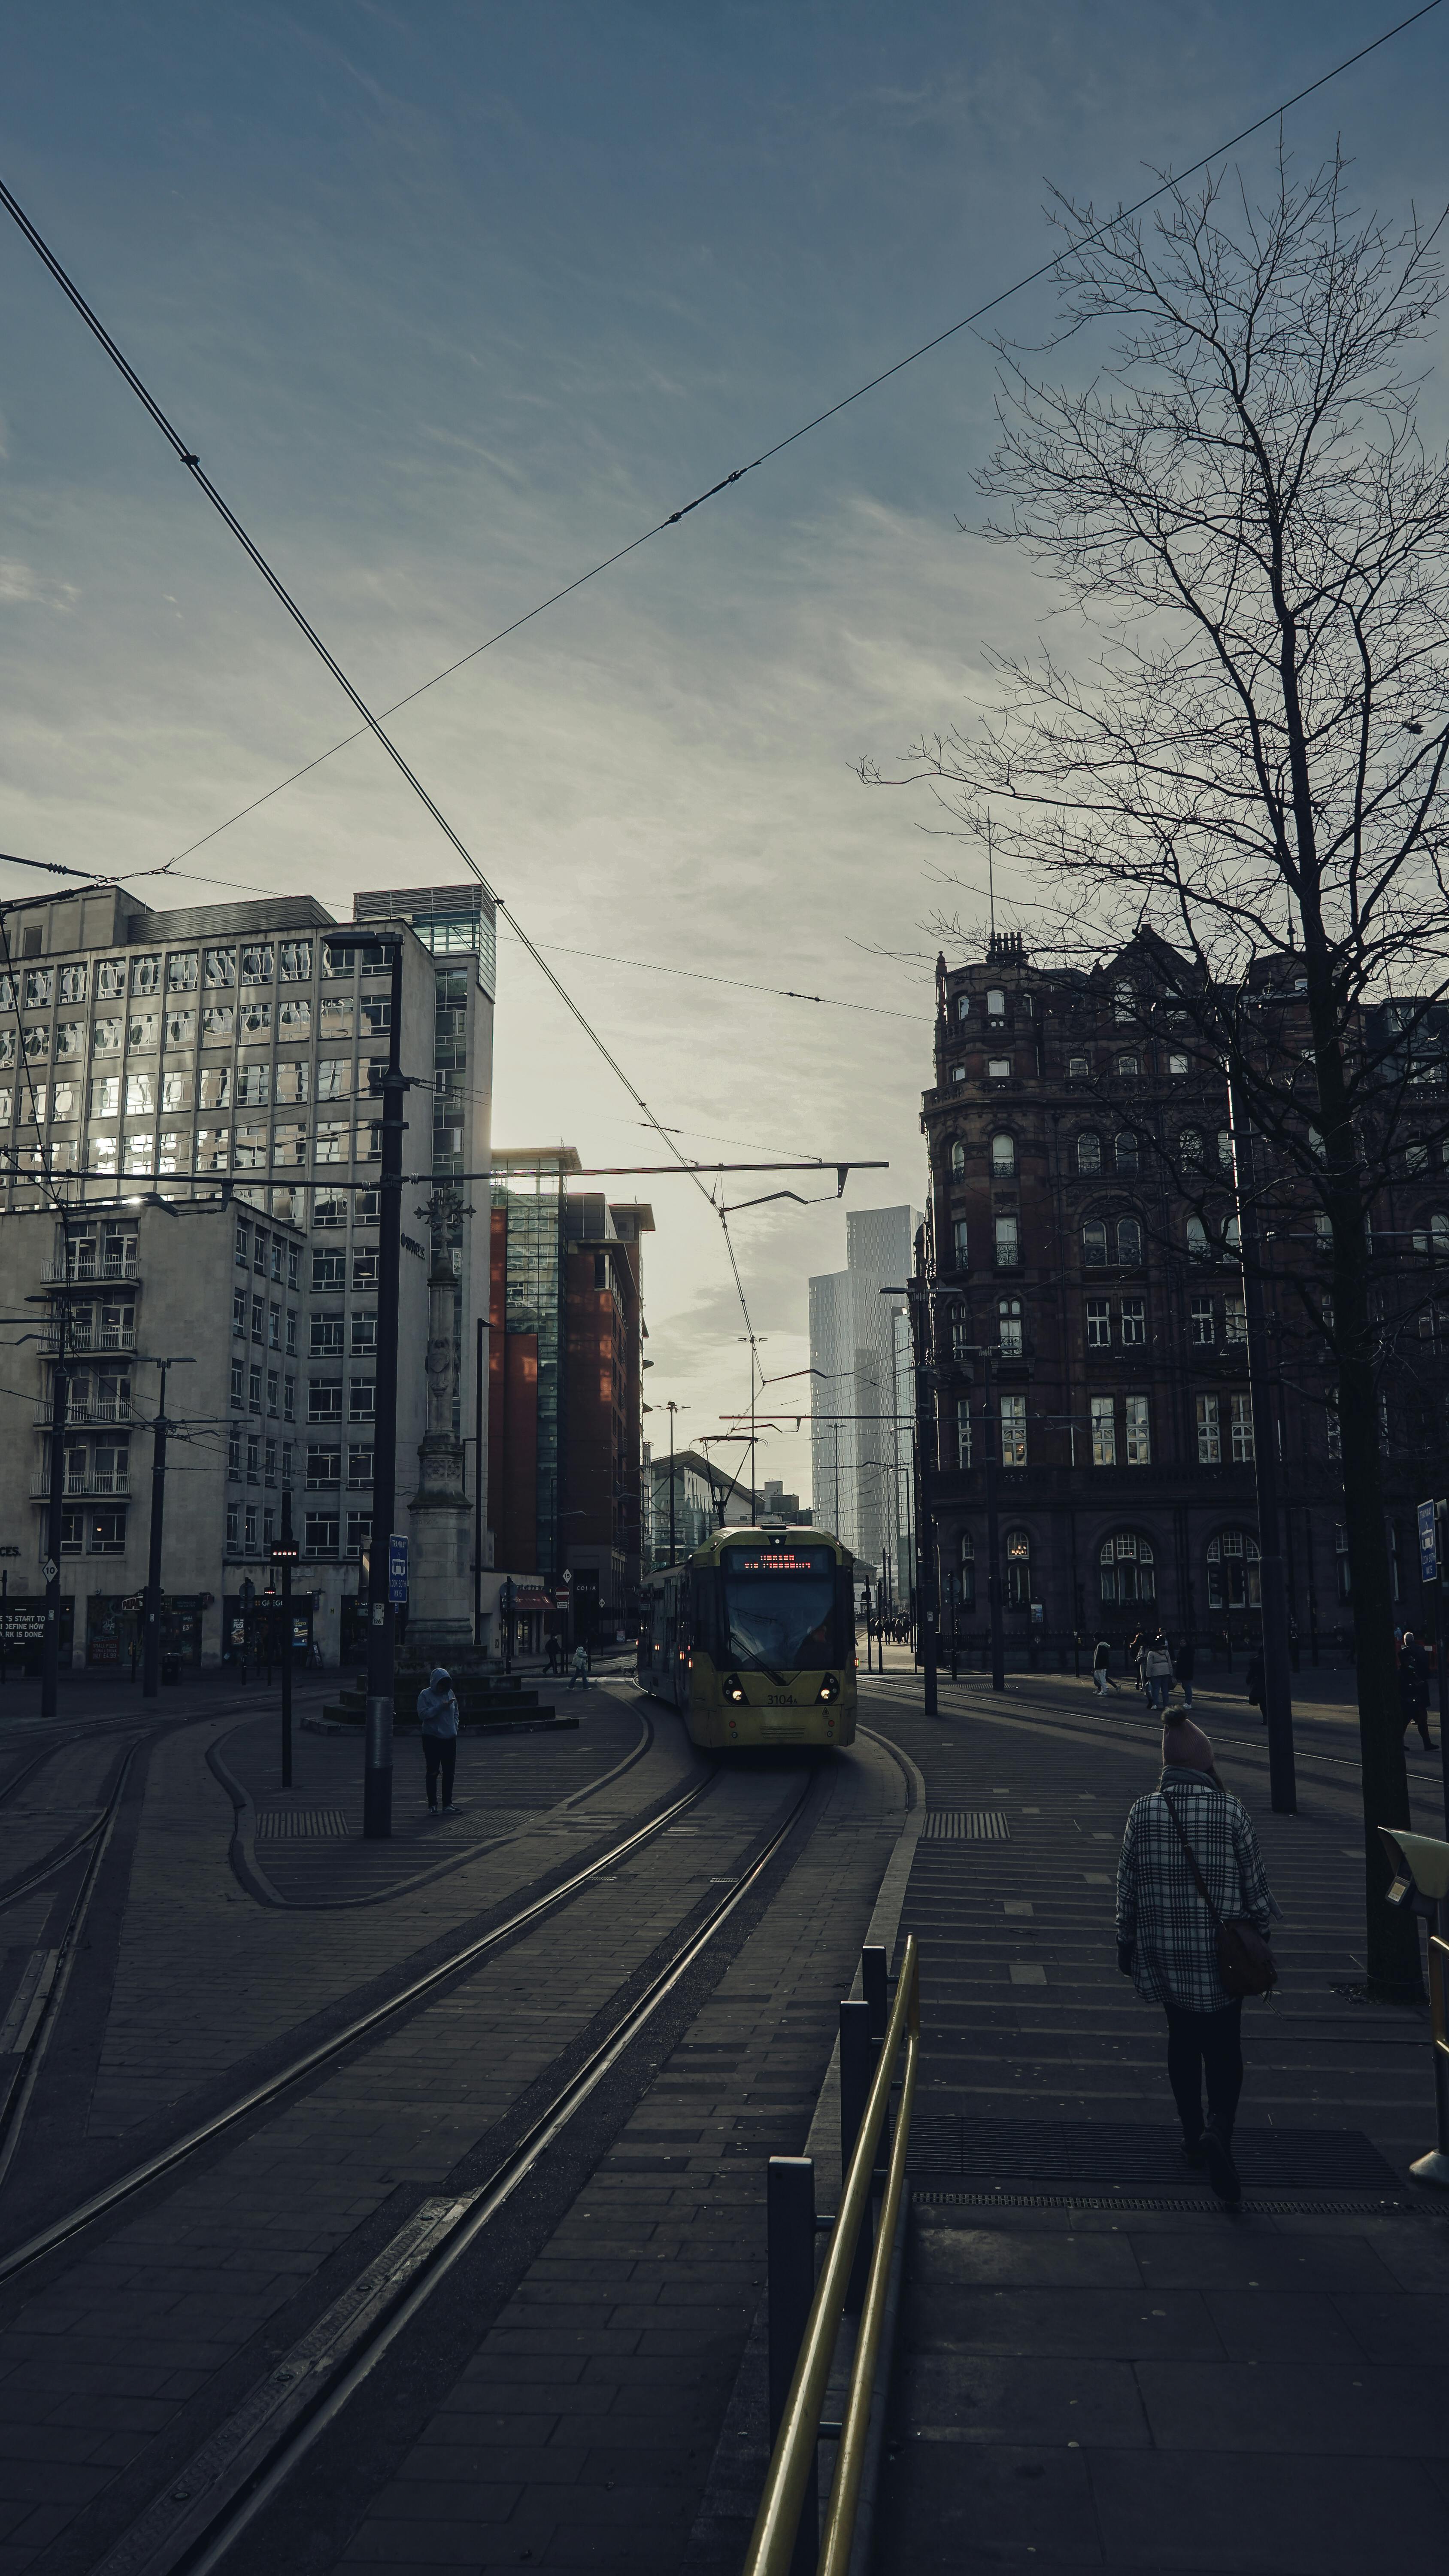 a tram on the tramway